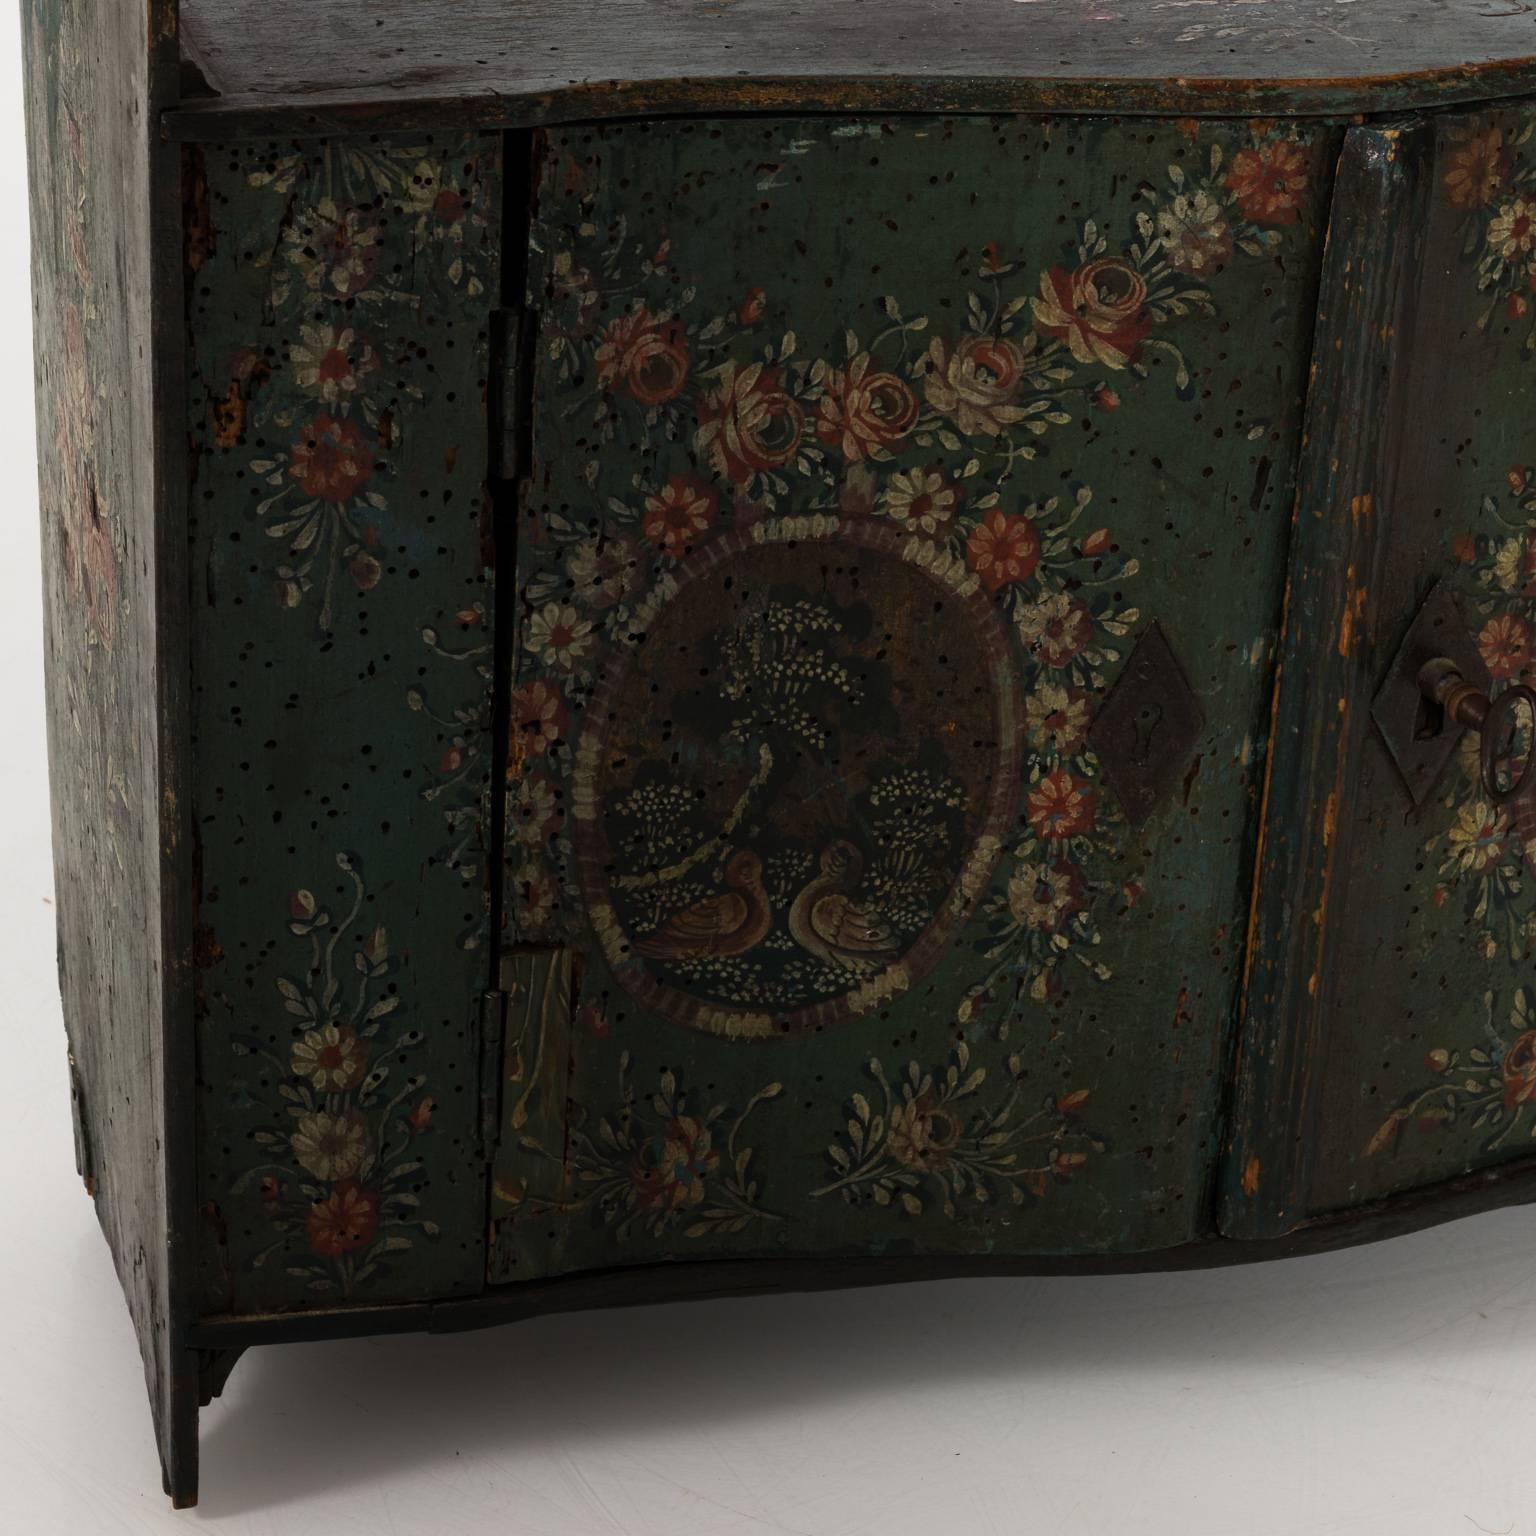 Hand-Painted Early 19th Century Small Painted Hanging Cabinet, circa 1930s